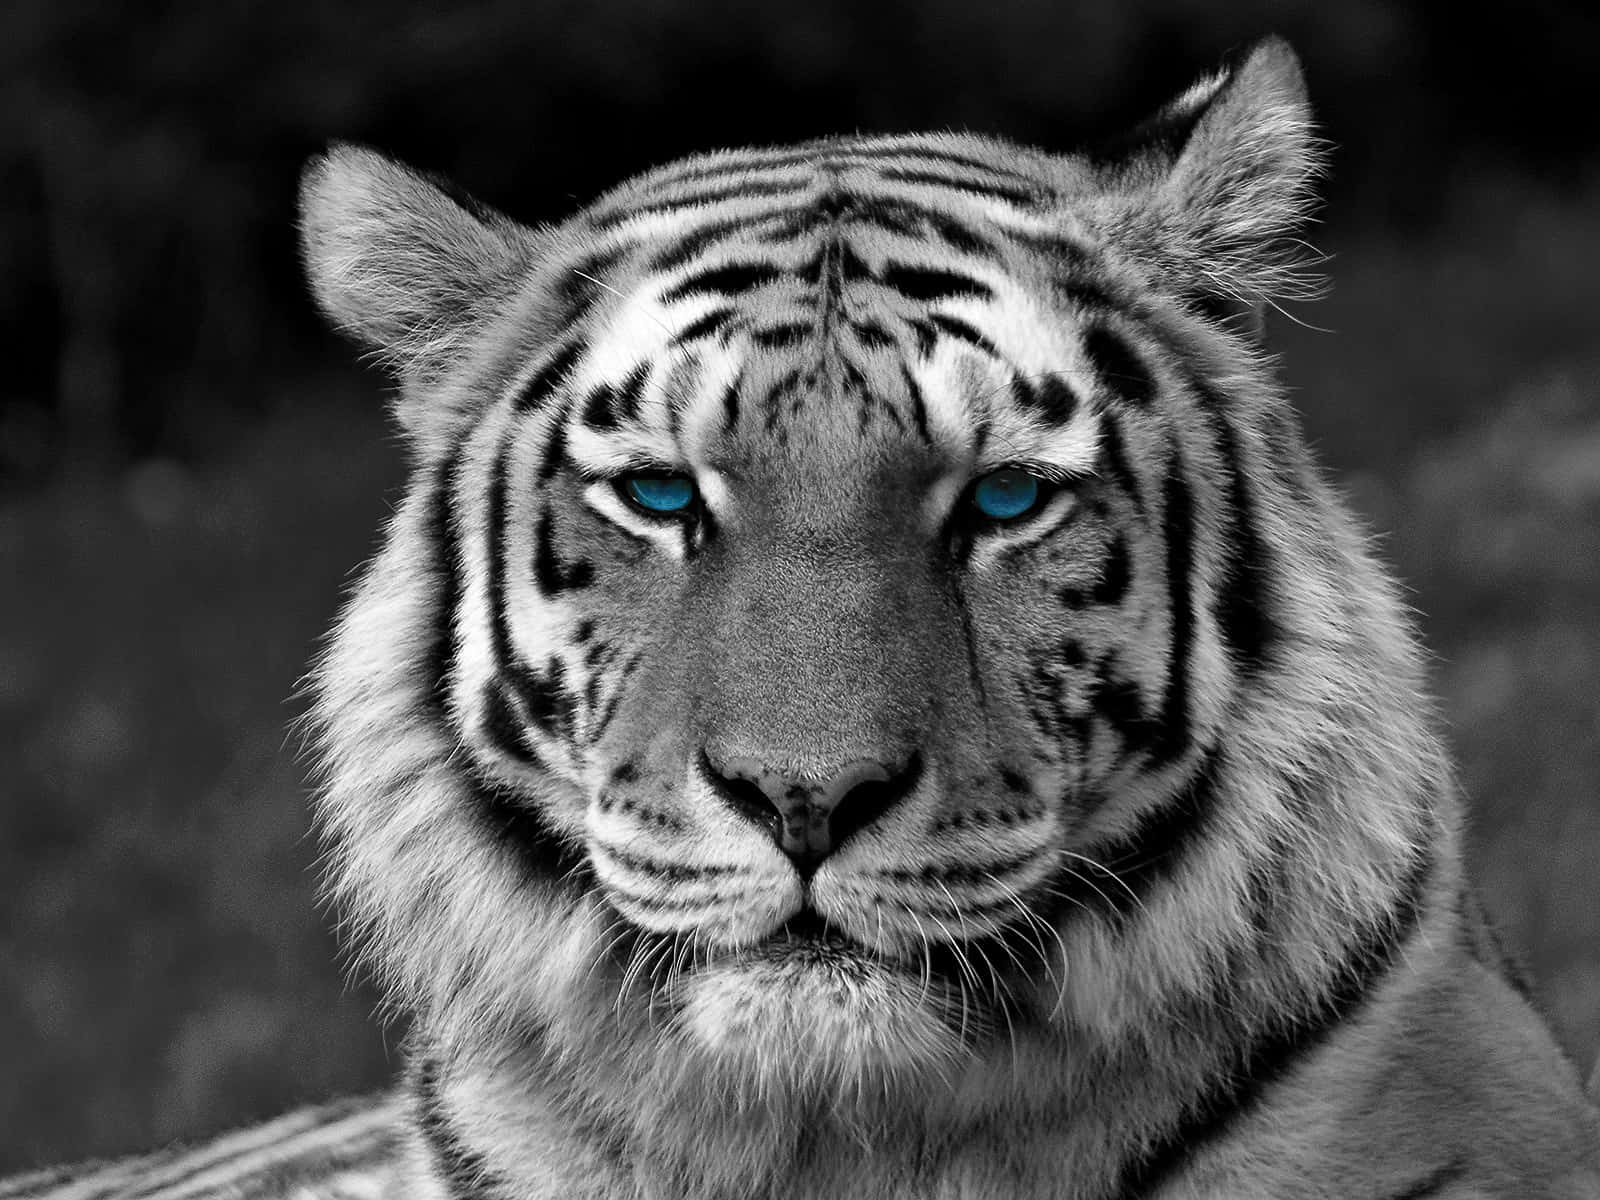 Tiger Face With Blue Eye Wallpaper